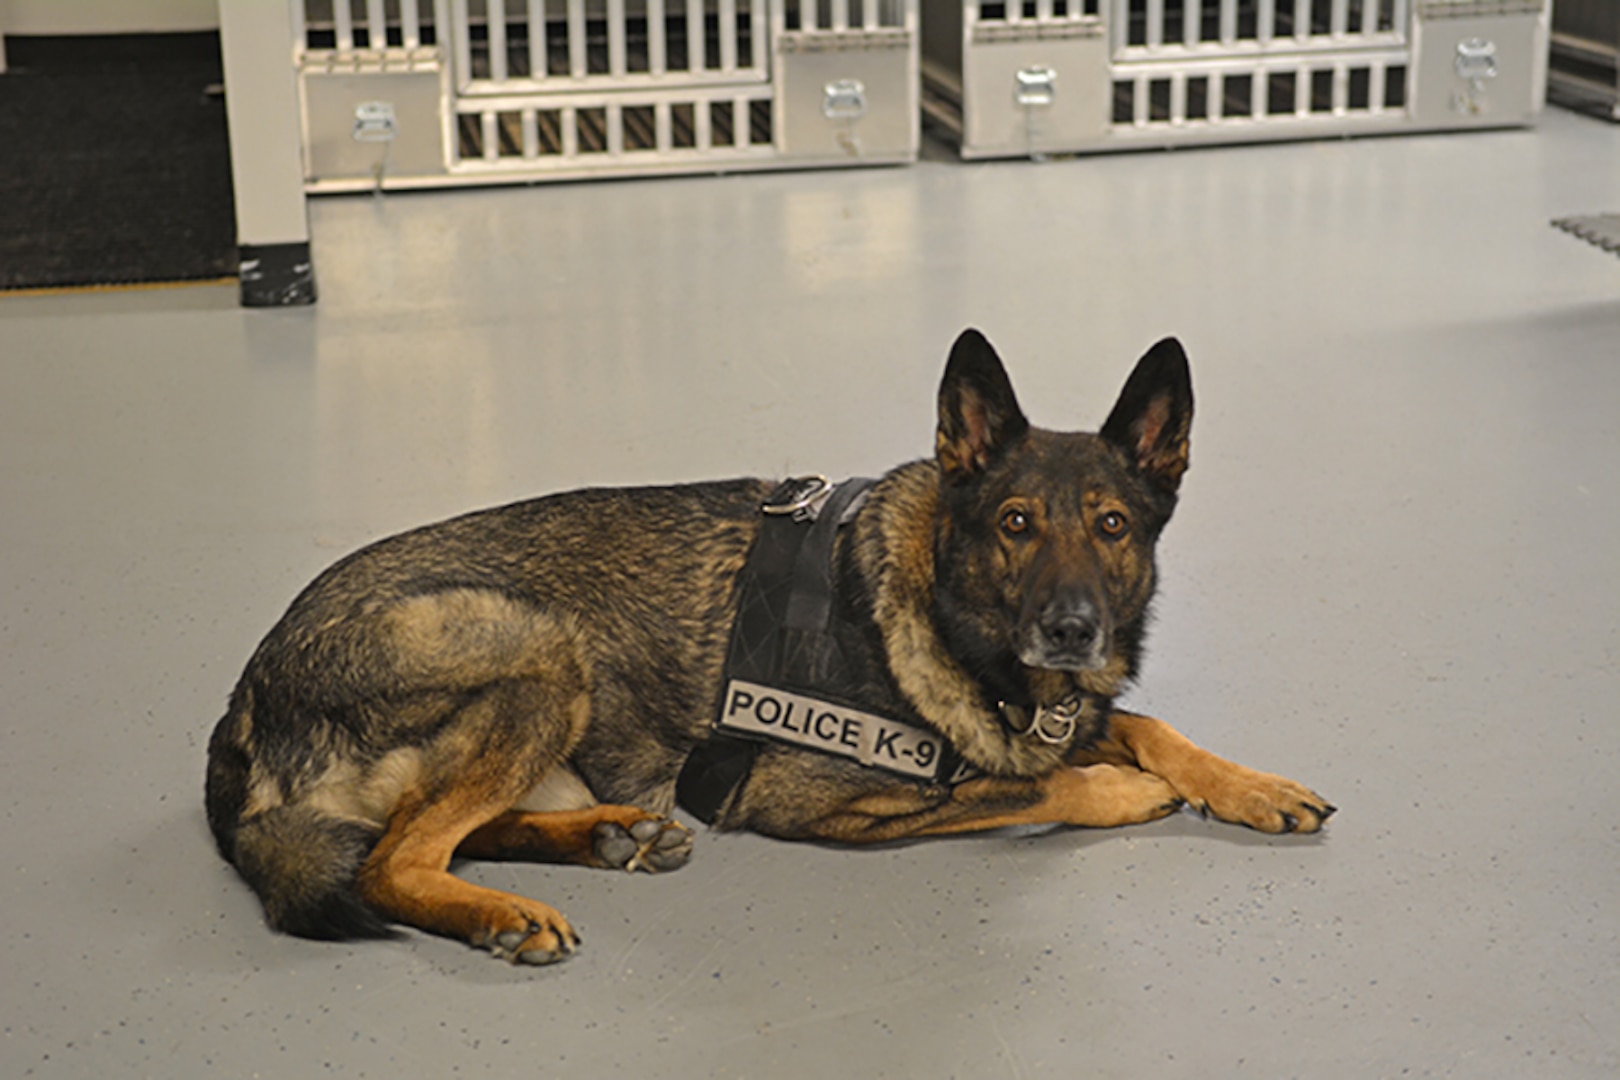 Sid, the K-9, officially retired from federal service on Nov. 8.